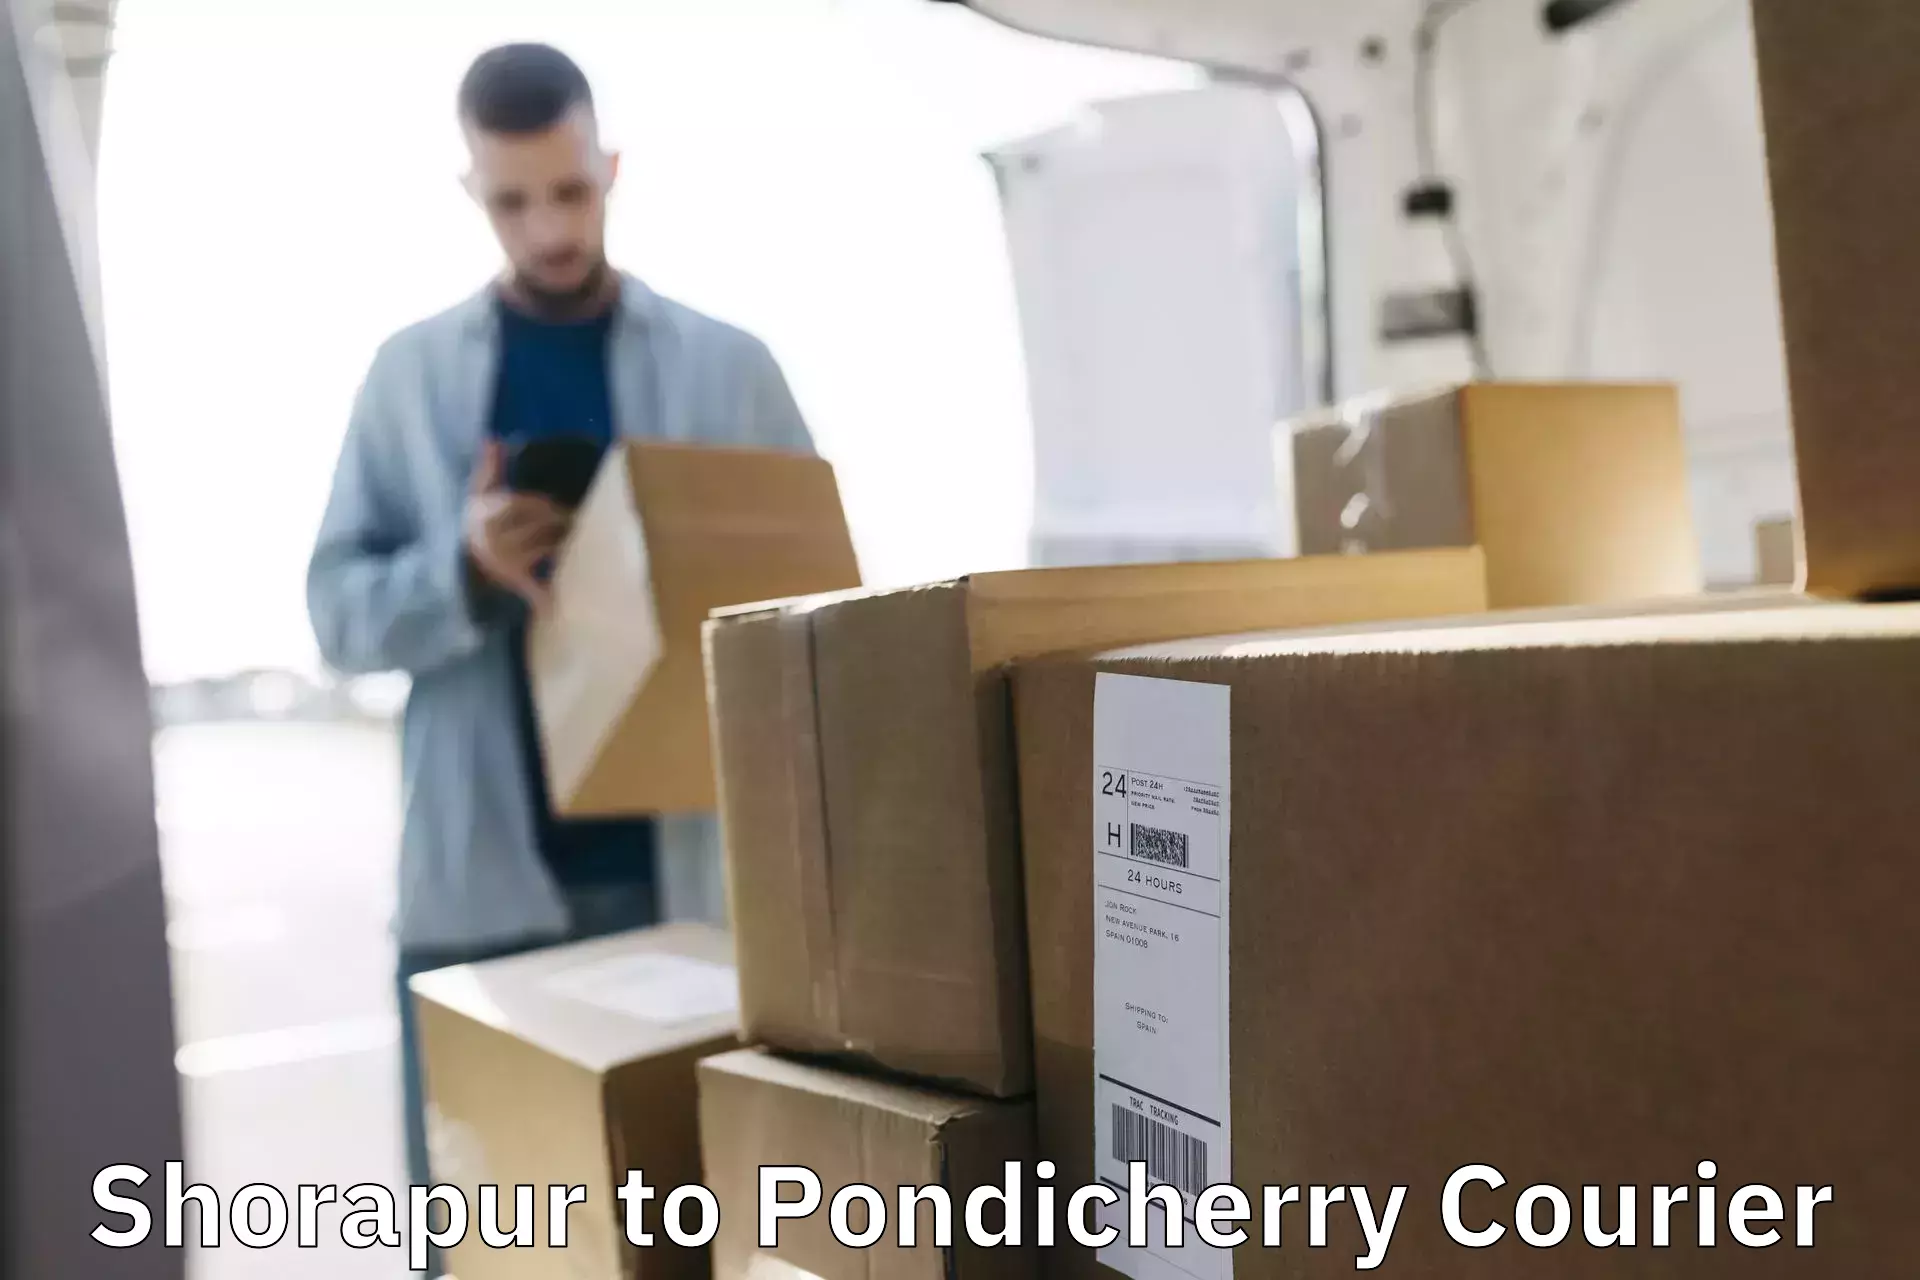 Subscription-based courier Shorapur to Pondicherry